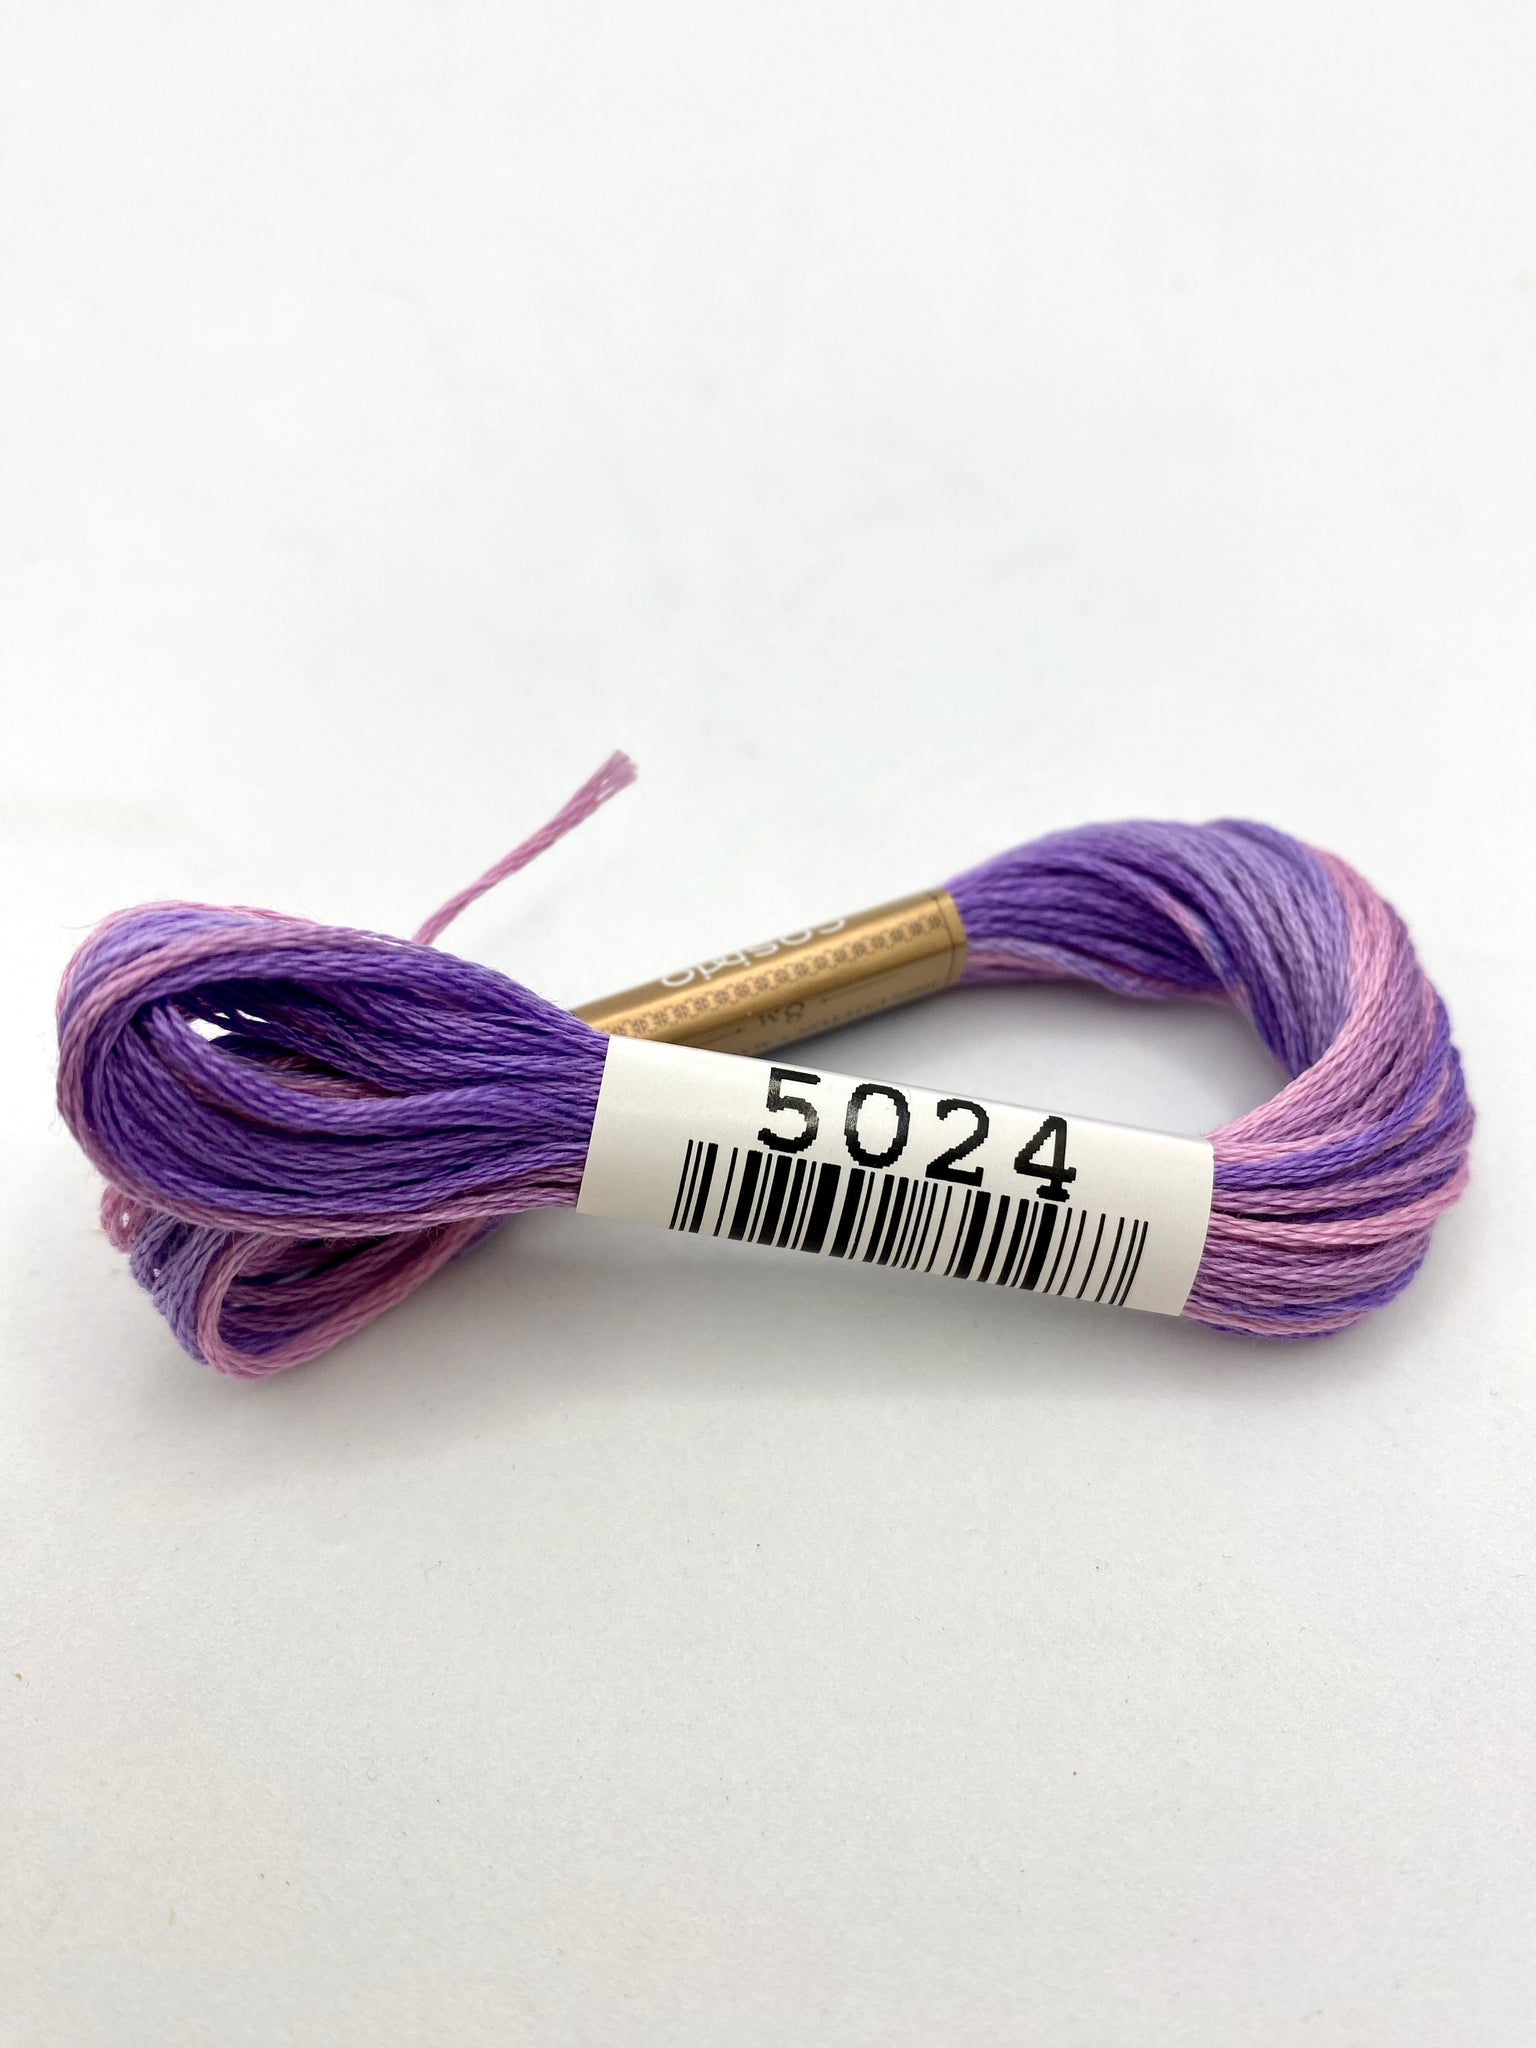 Hand Embroidery Floss - Cosmo Seasons Variegated #8037